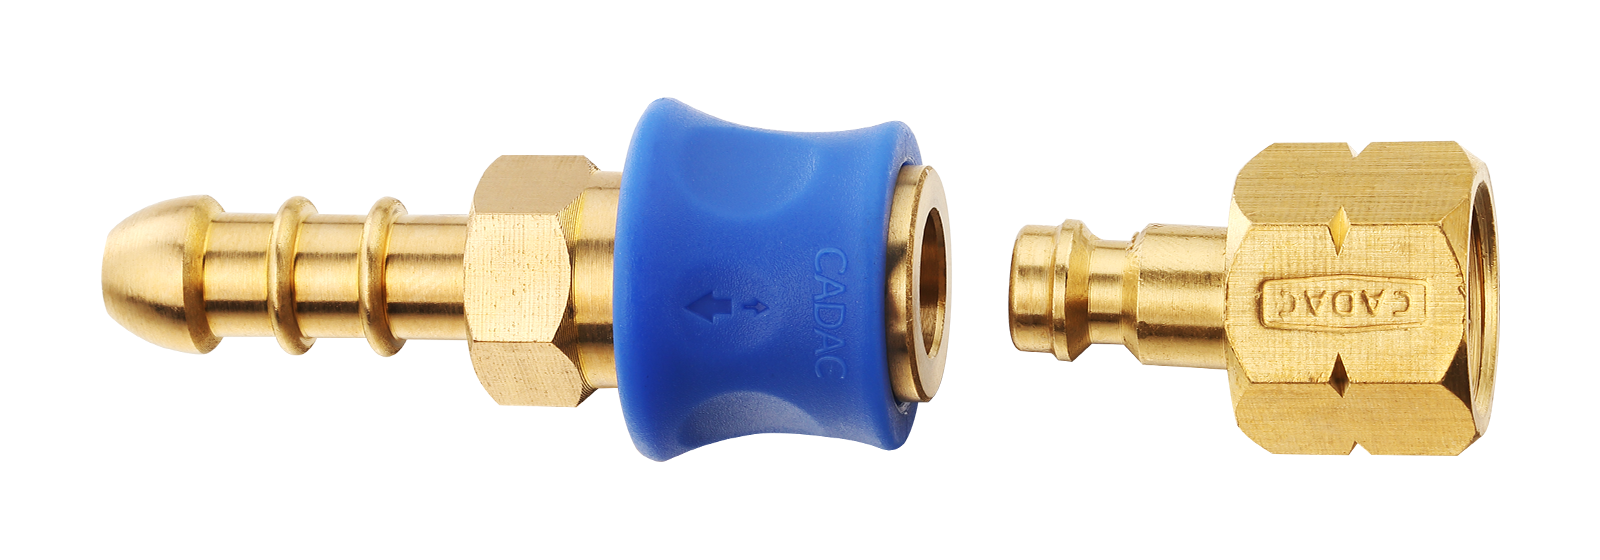 Cadac - 8mm Quick Release Coupling